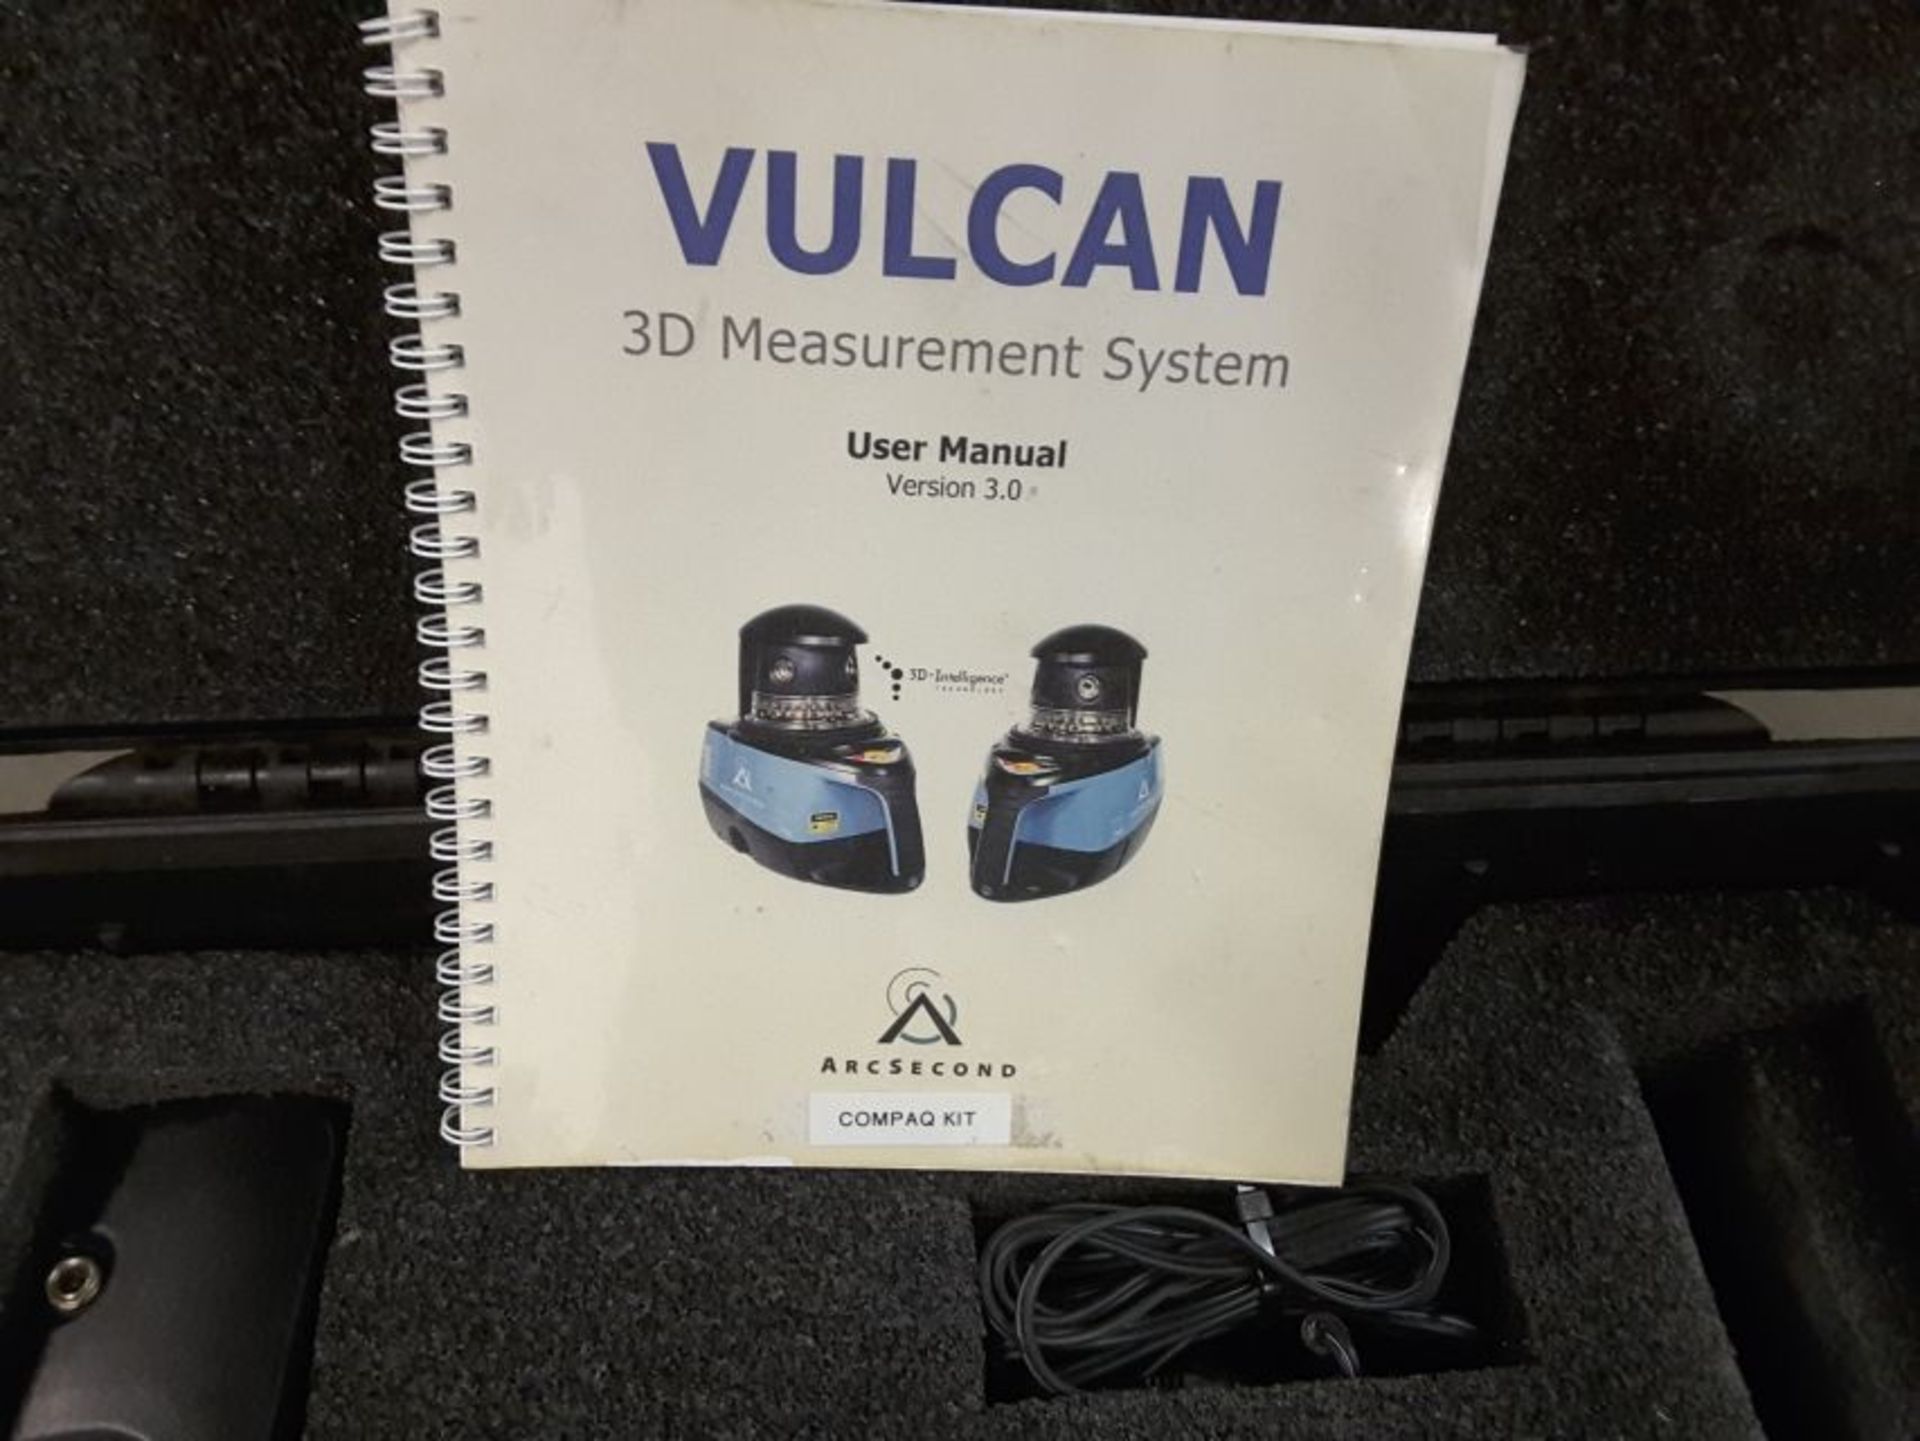 Vulcan ArcSecond 3D measurement system in hard case with accessories - Image 2 of 3